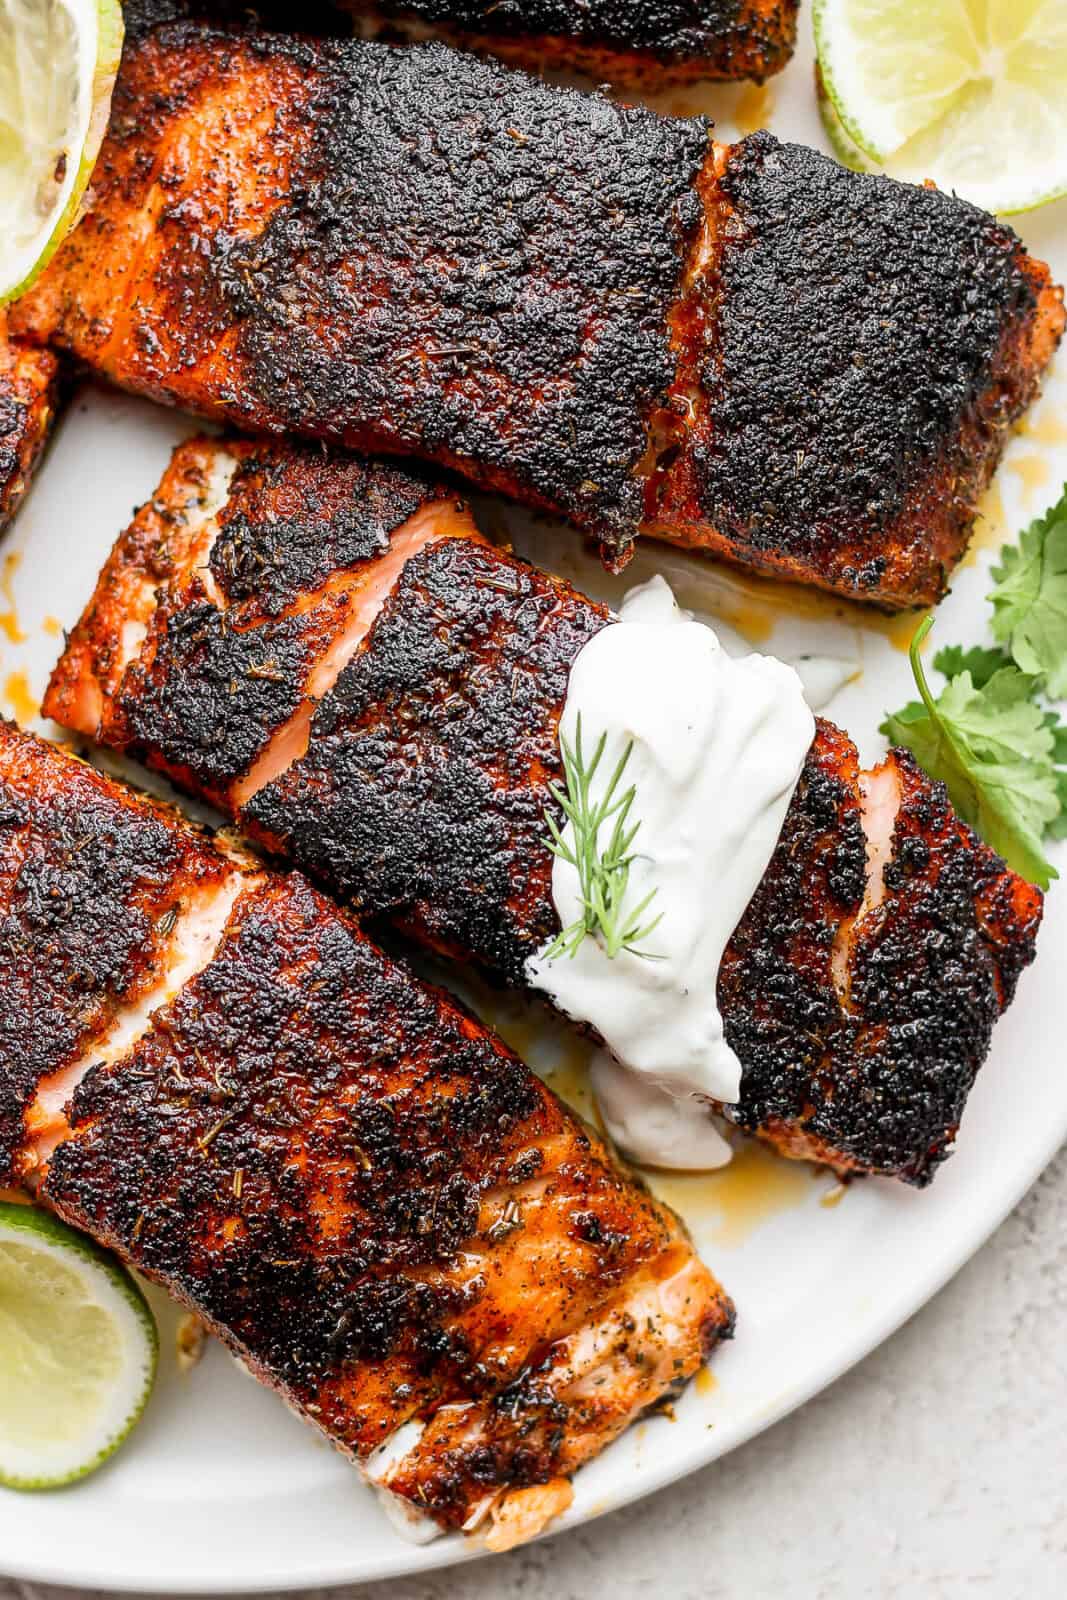 Blackened salmon fillets on a plate with dill sauce.